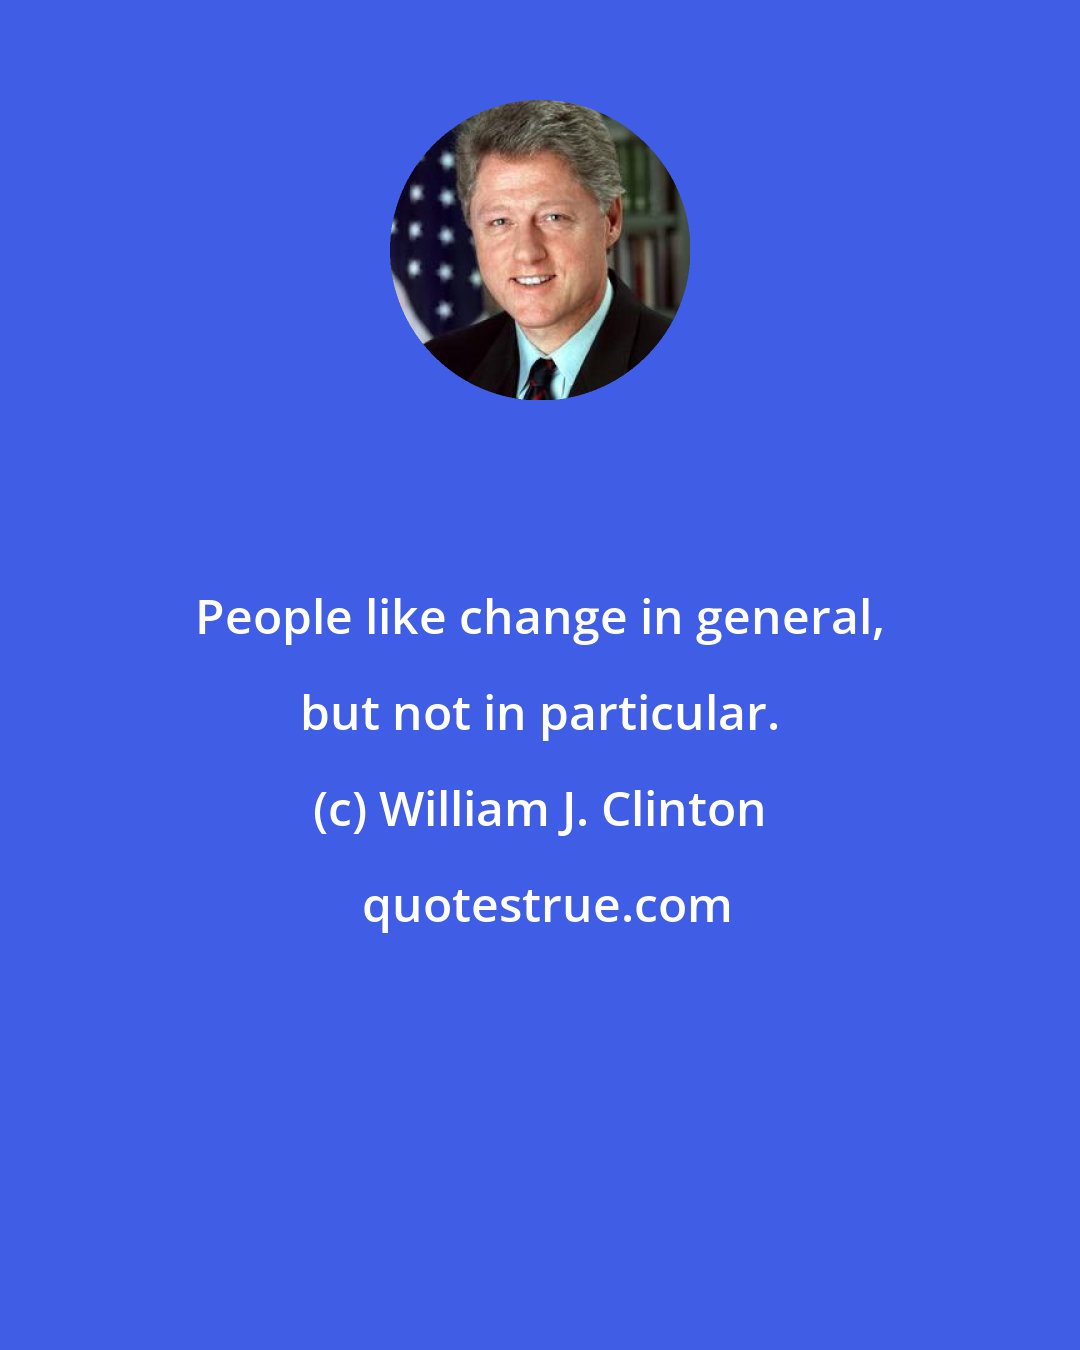 William J. Clinton: People like change in general, but not in particular.